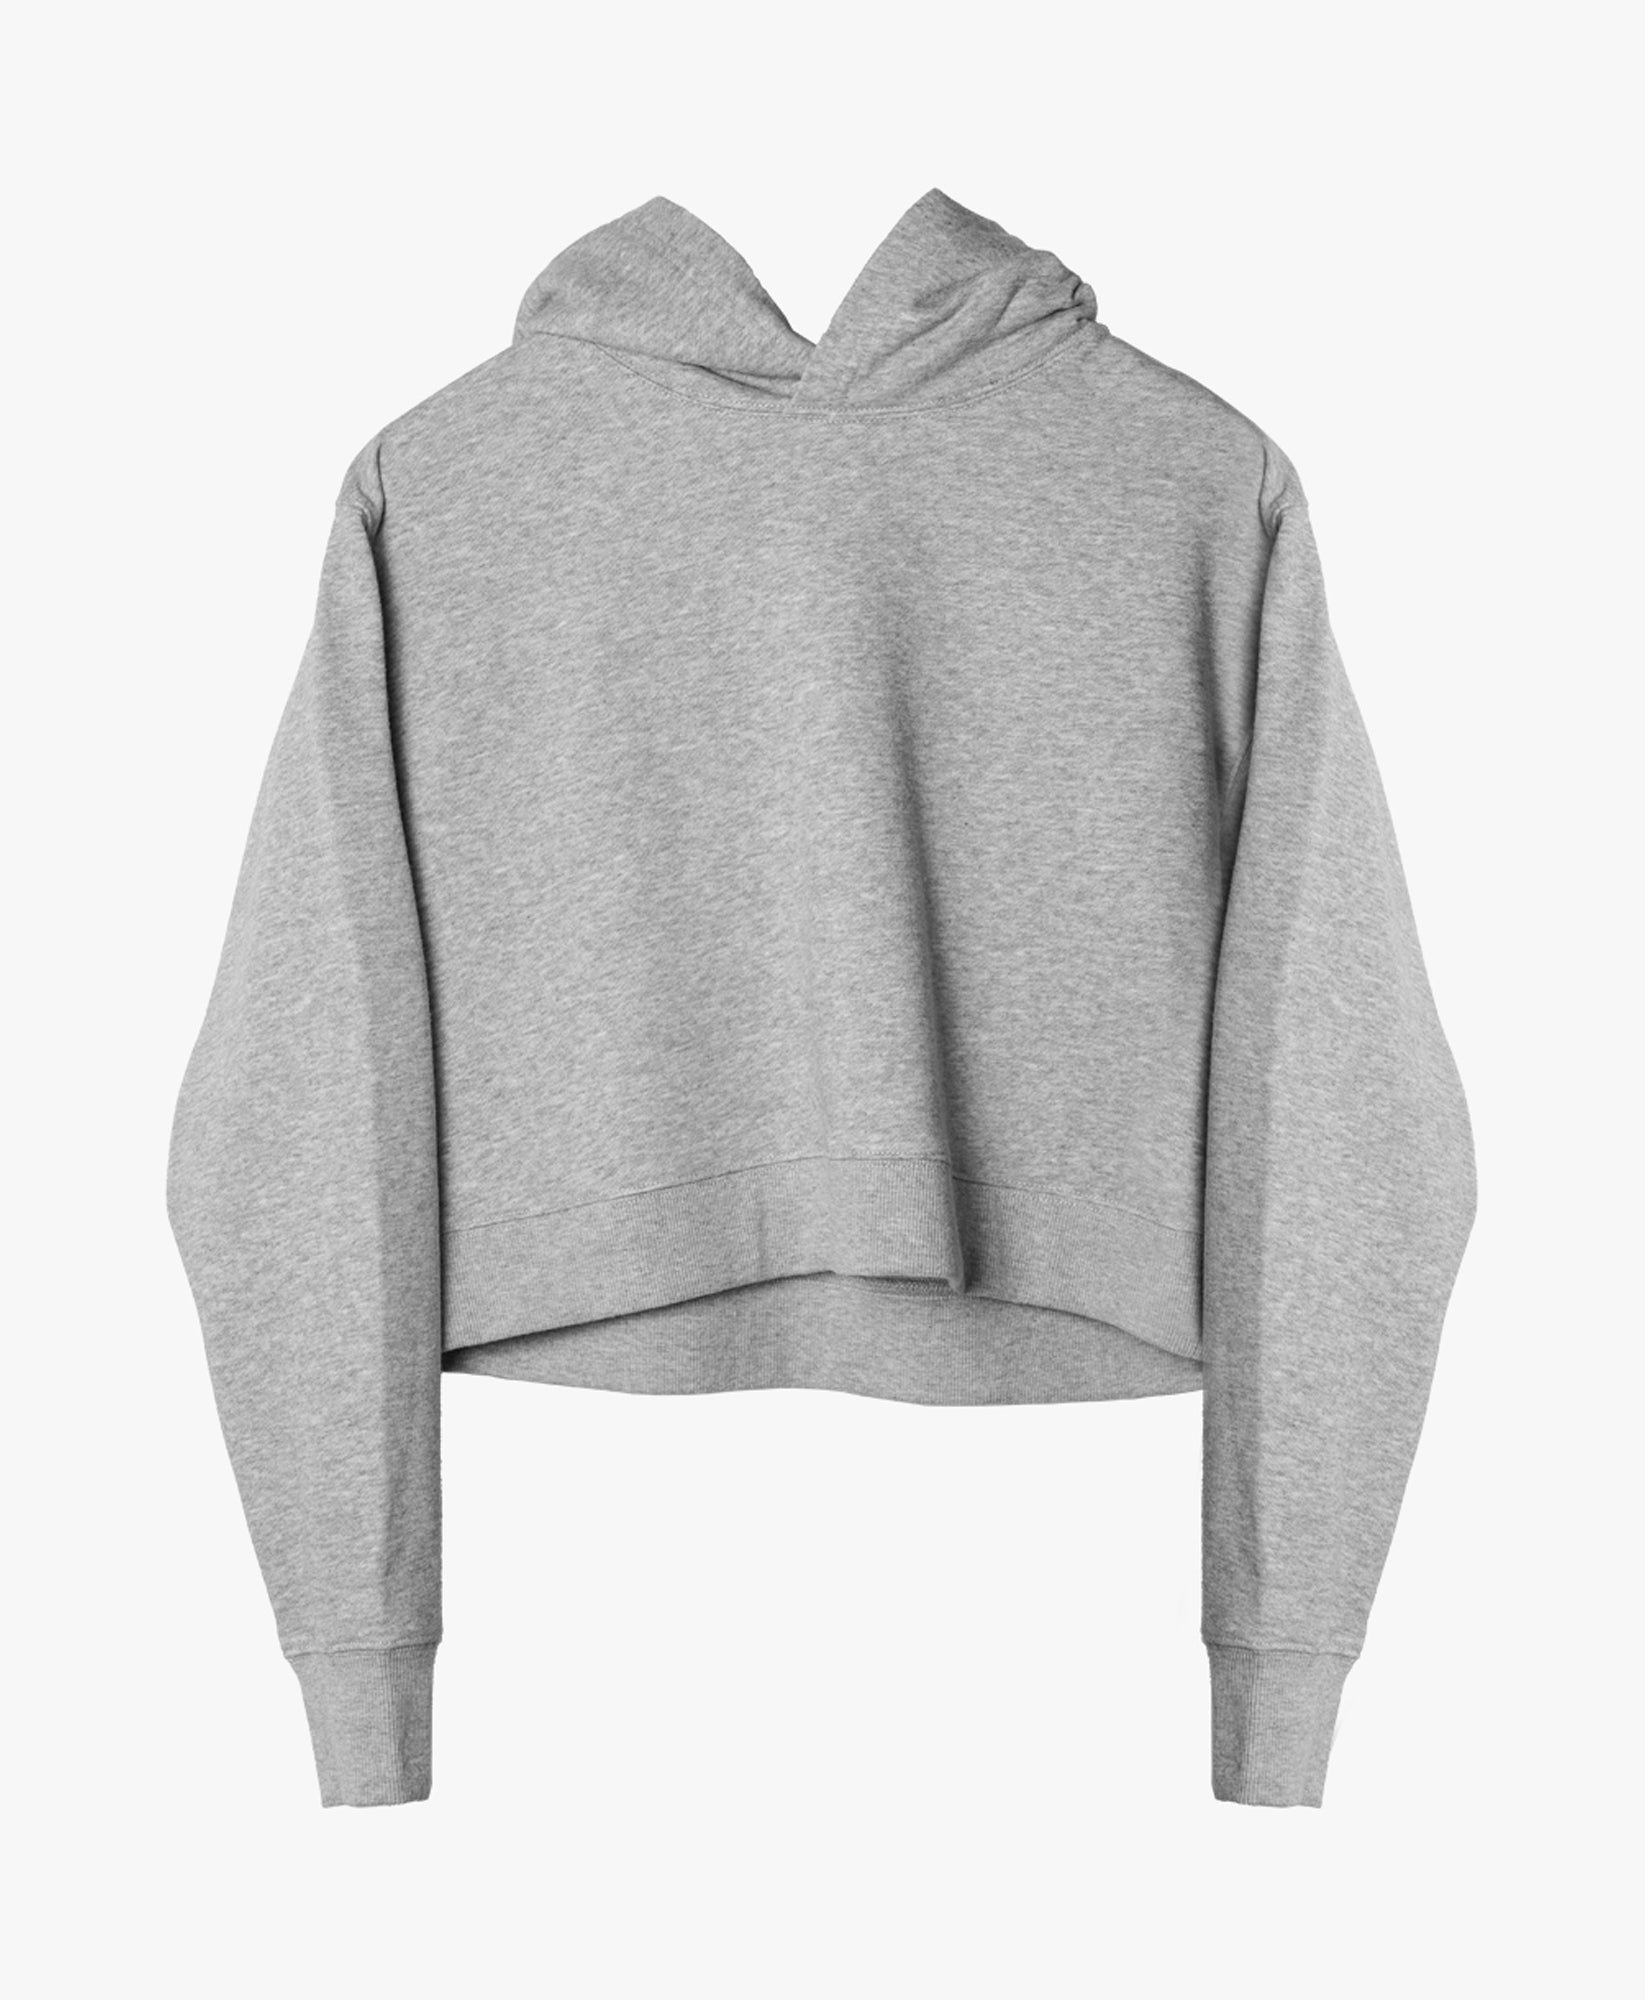 Wear One's At French Terry Cropped Hoodie in Sport Grey Flat Front